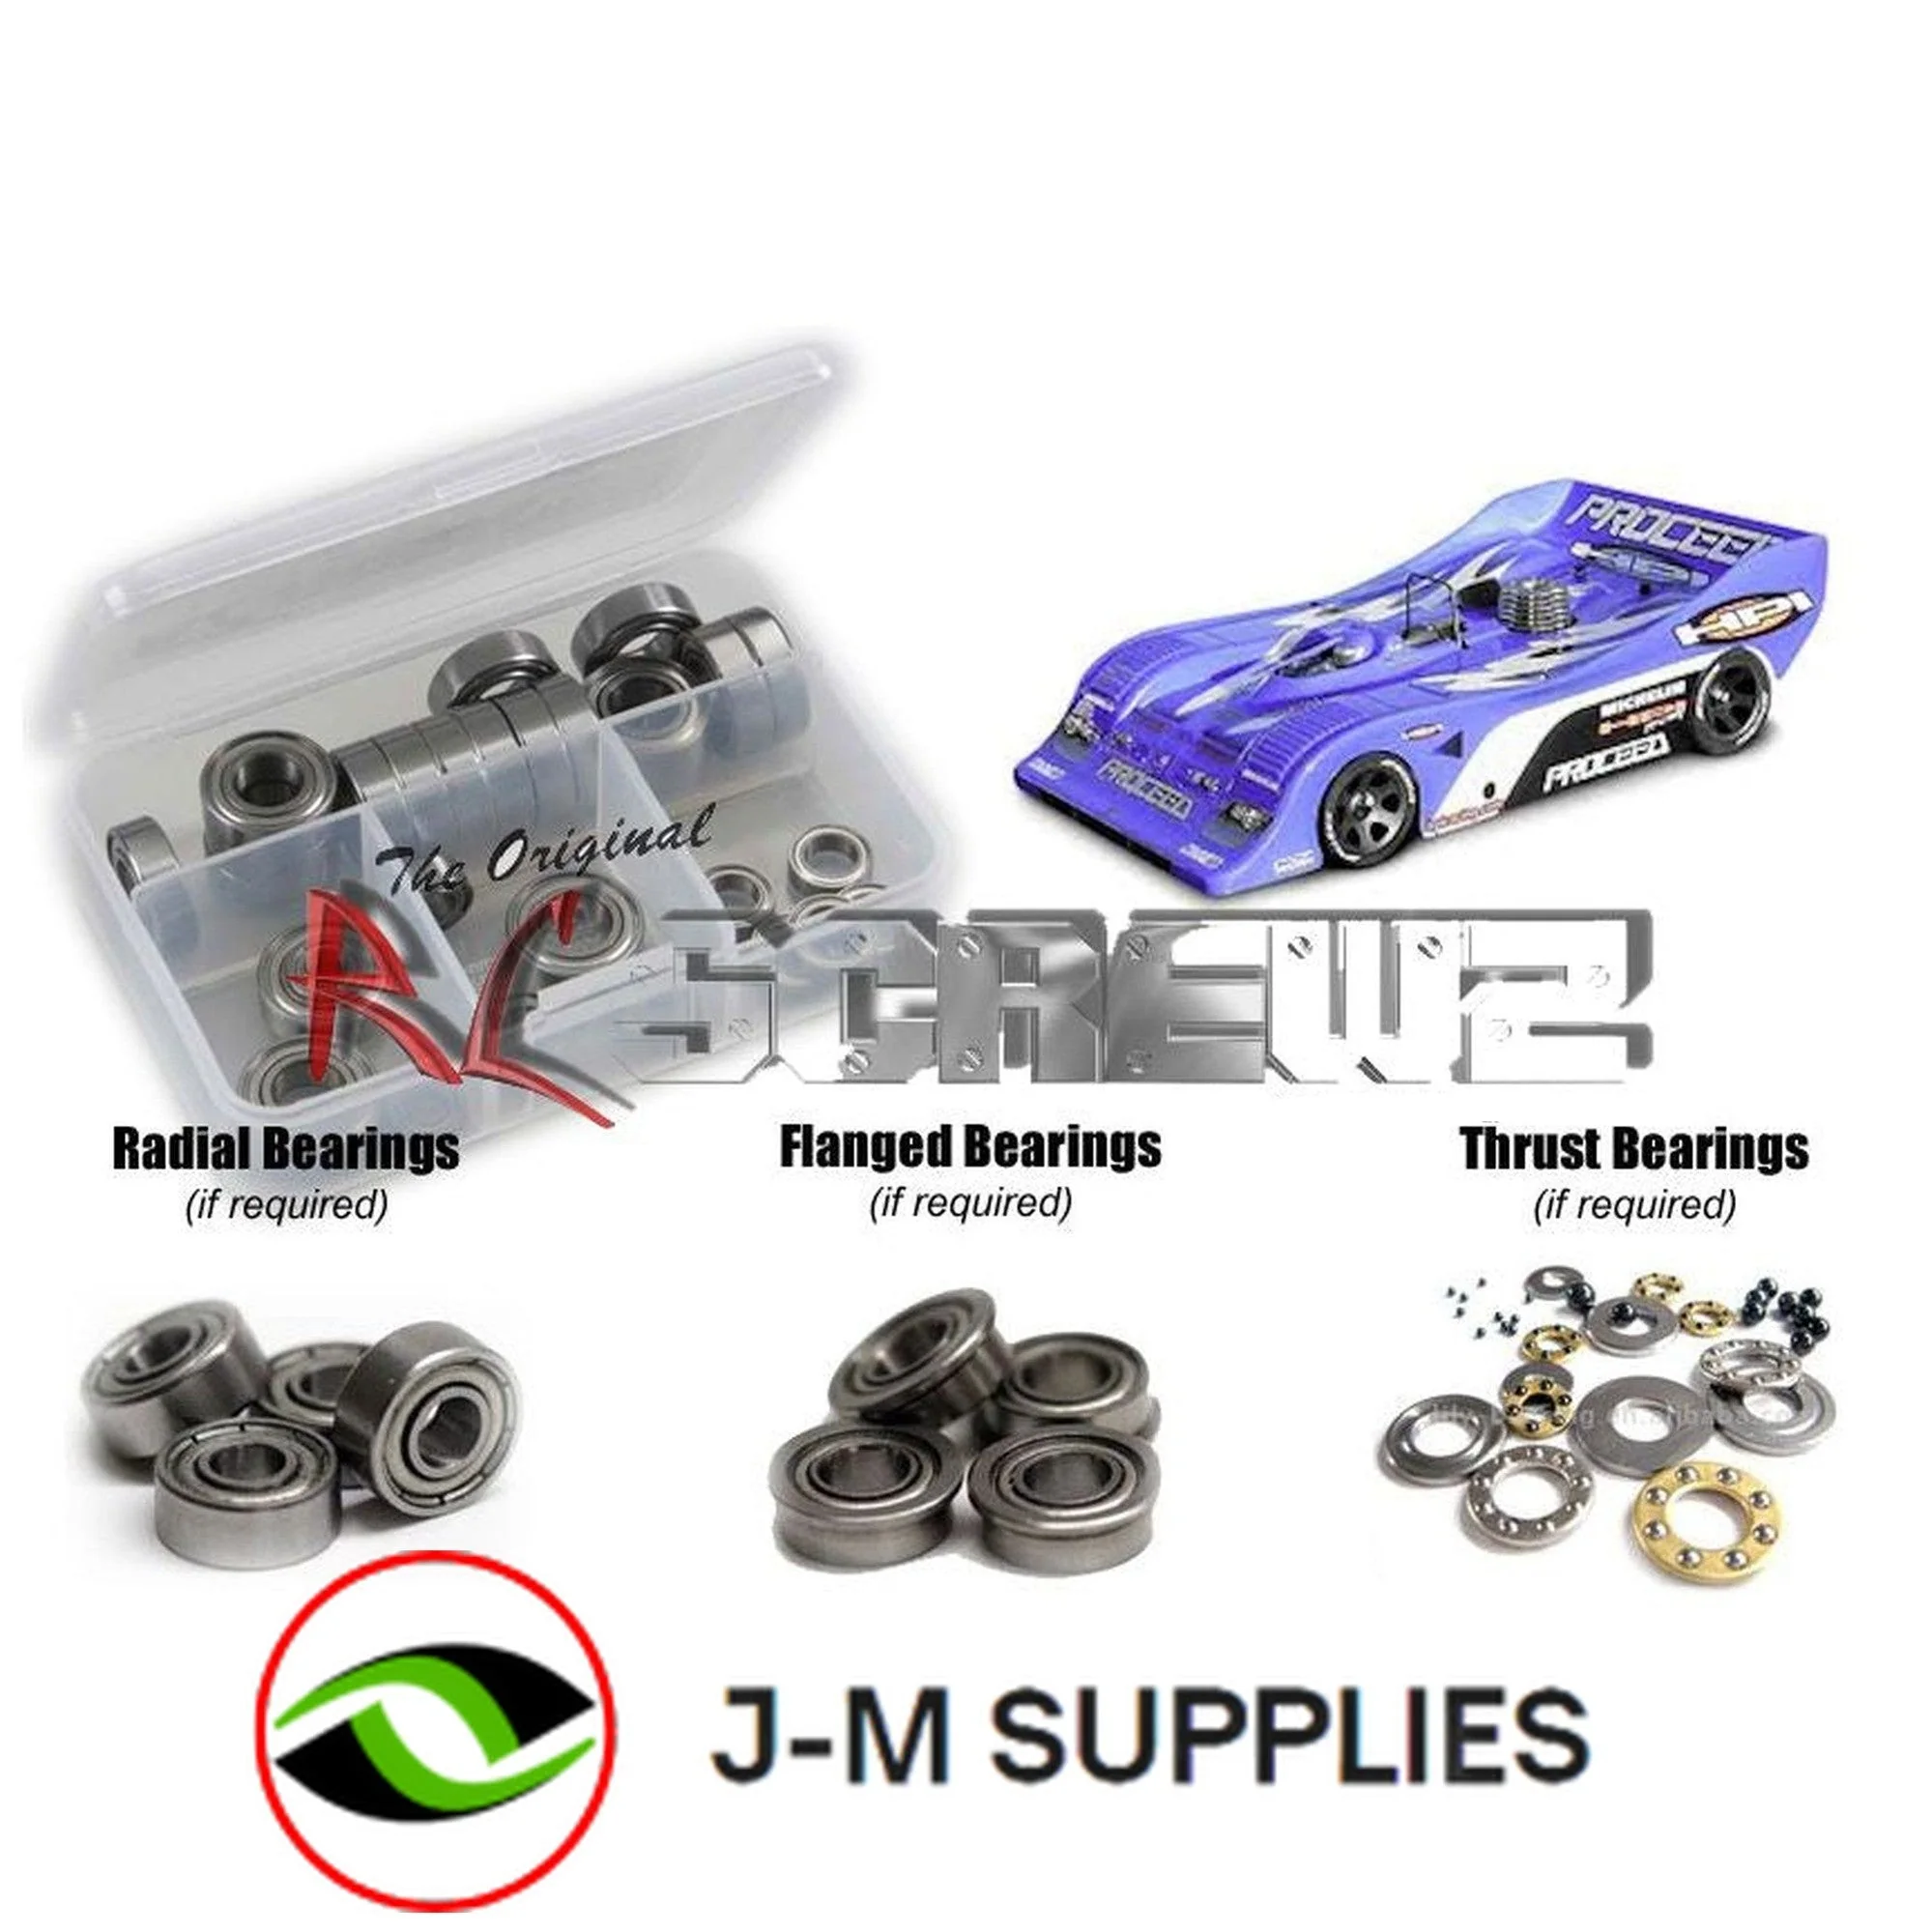 RCScrewZ Metal Shielded Bearing Kit hpi008b for HPI Racing Proceed 1/8 Onroad - Picture 1 of 12